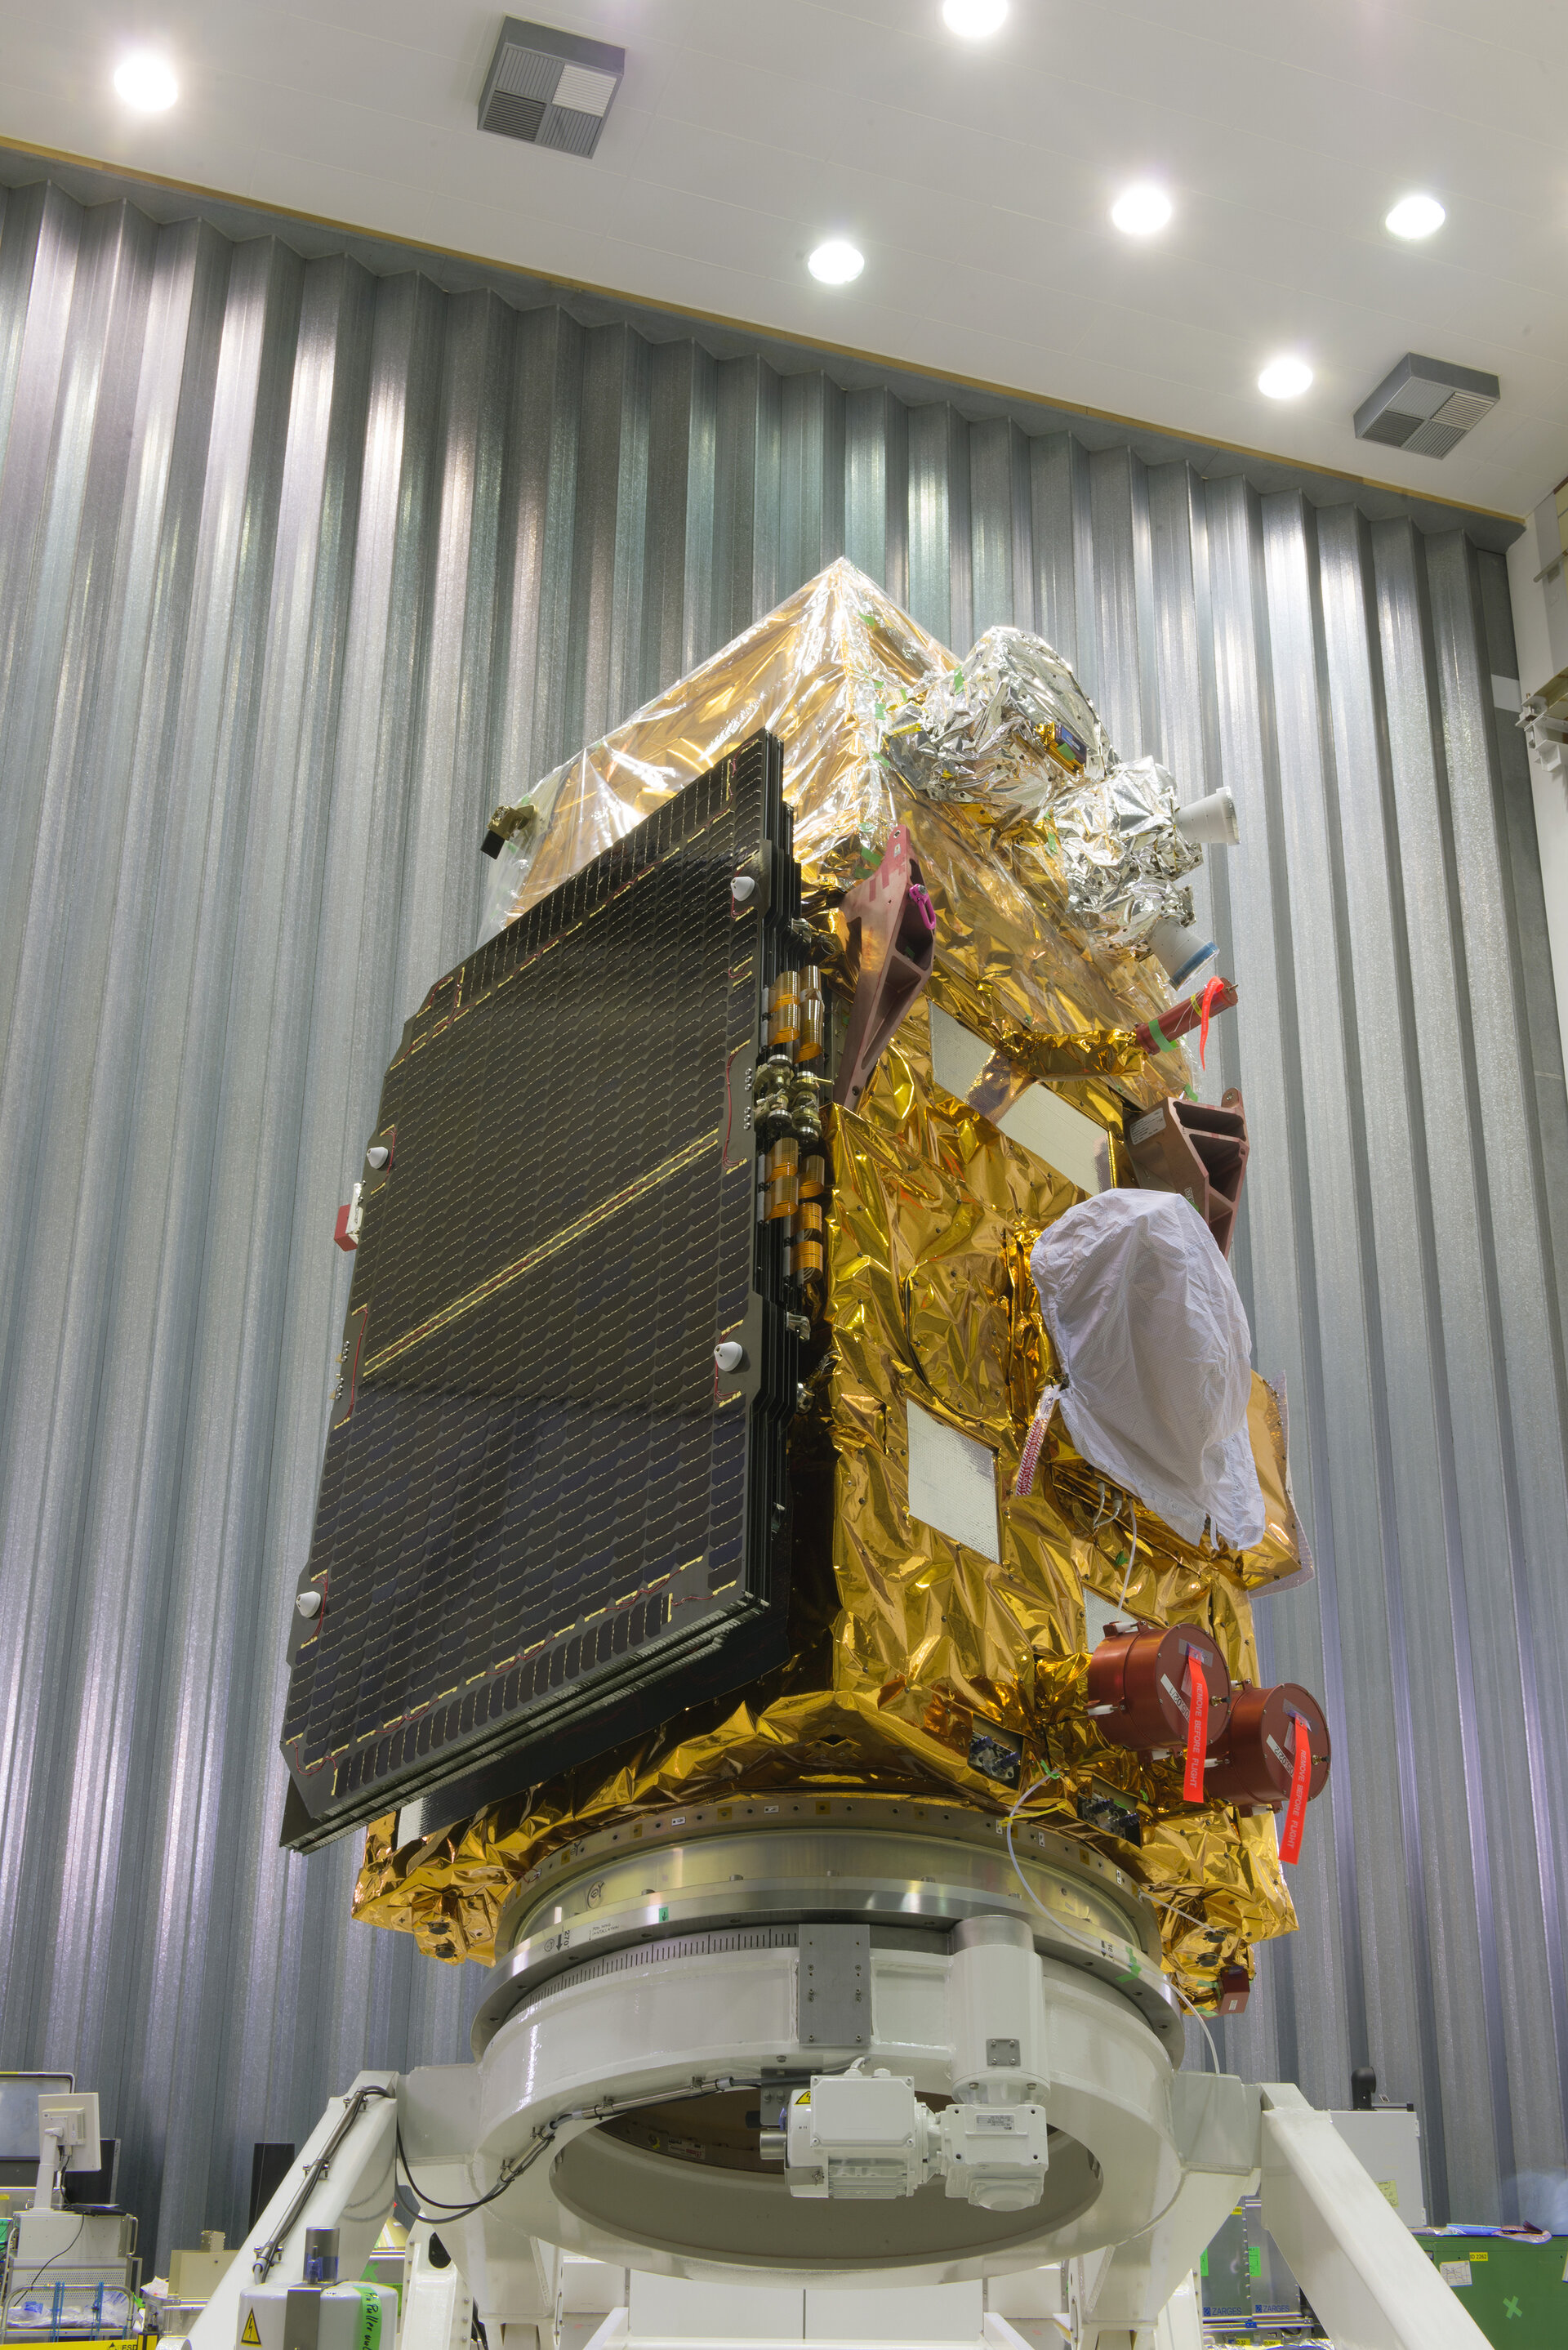 Sentinel-2B satellite at ESA’s site in the Netherlands